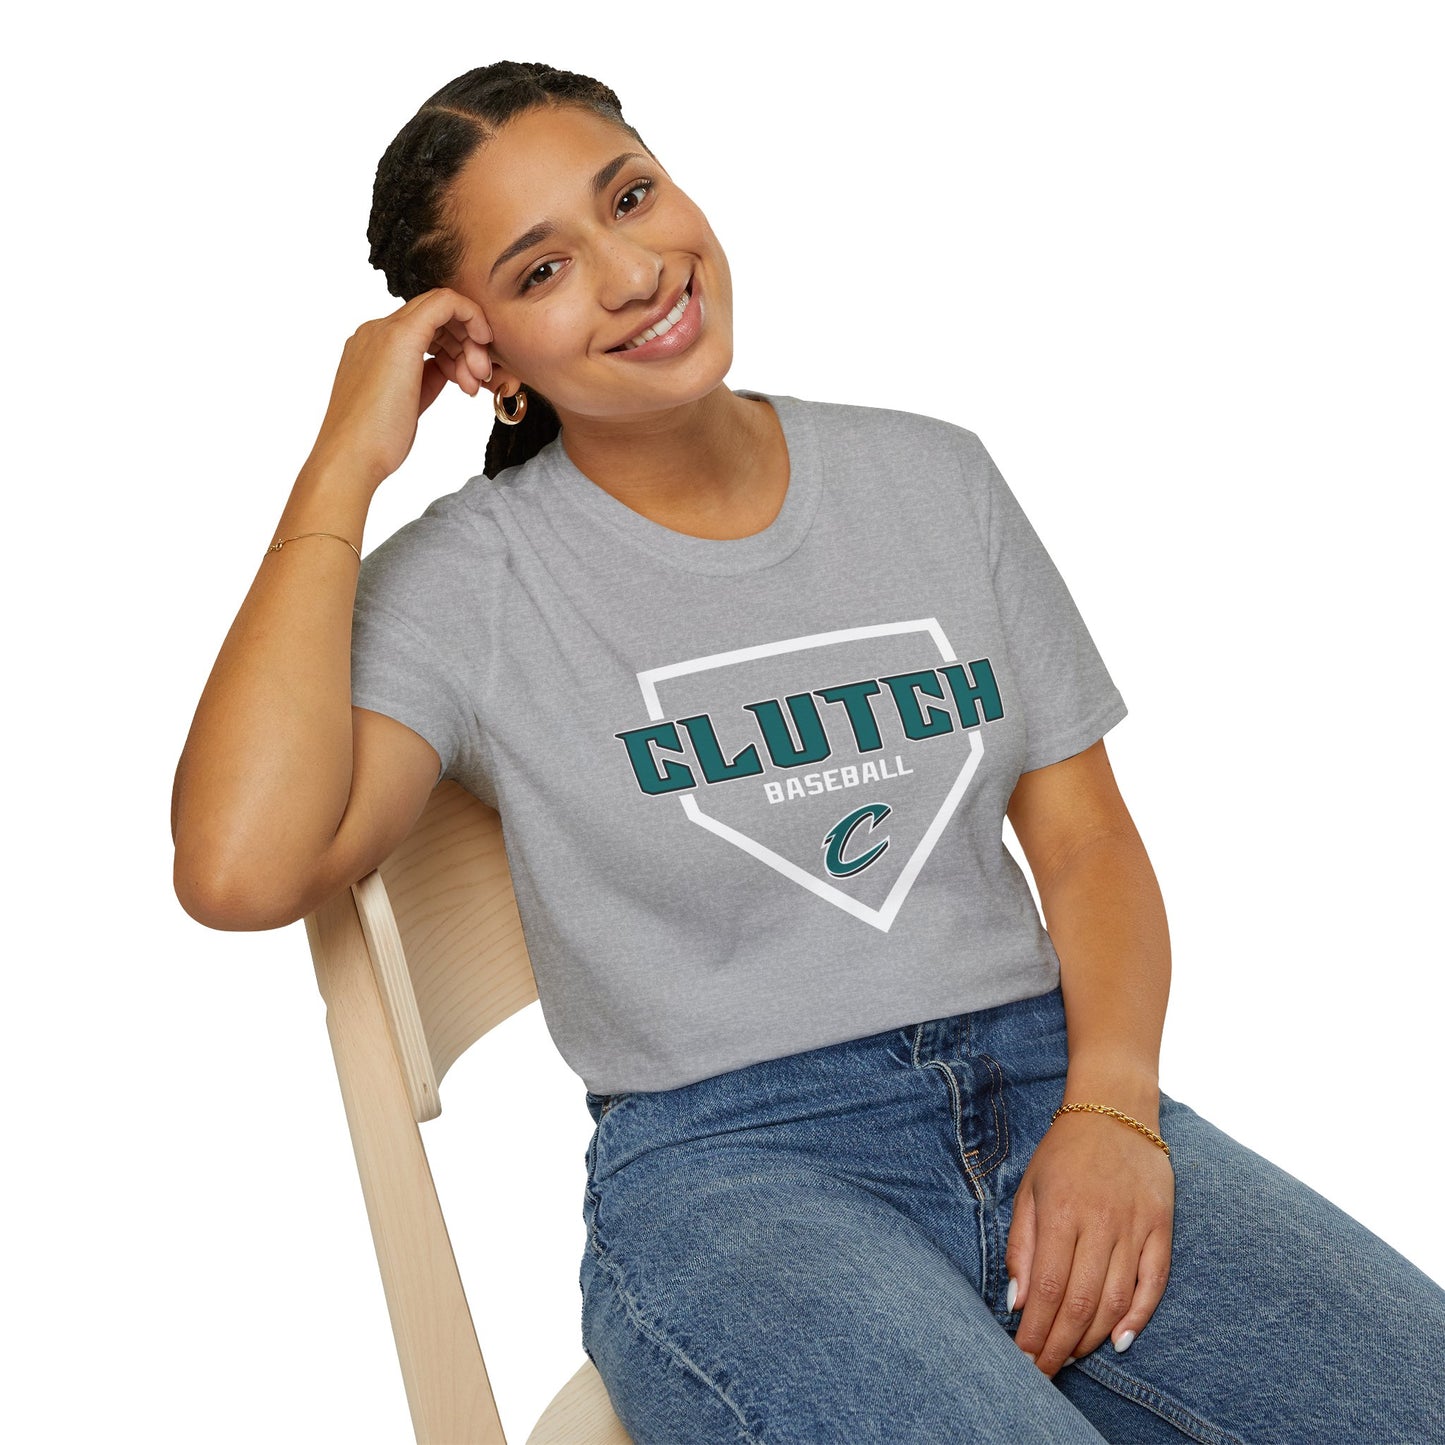 Clutch Plate Unisex Softstyle T-Shirt